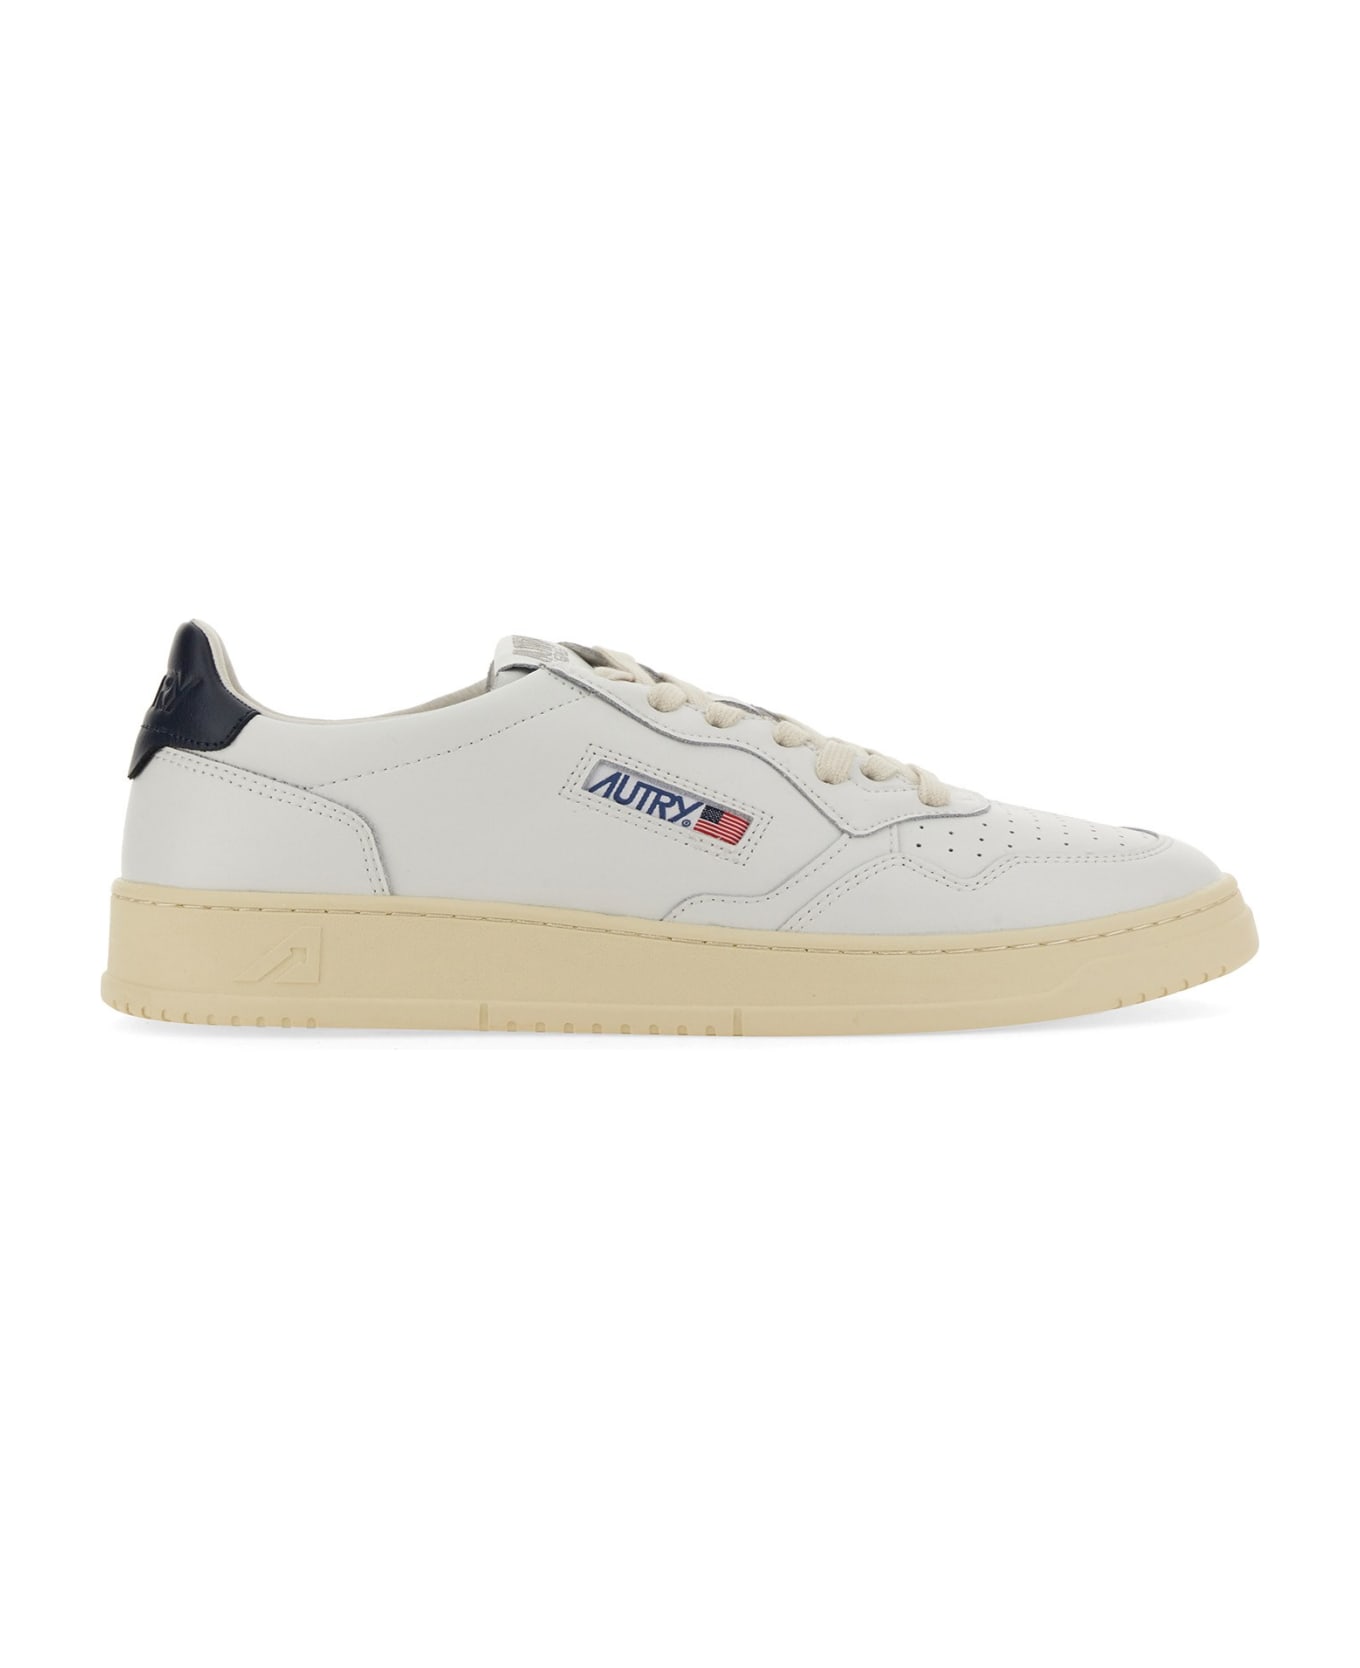 Autry Medalist Low Sneakers In White And Navy Blue Leather - Bianco スニーカー